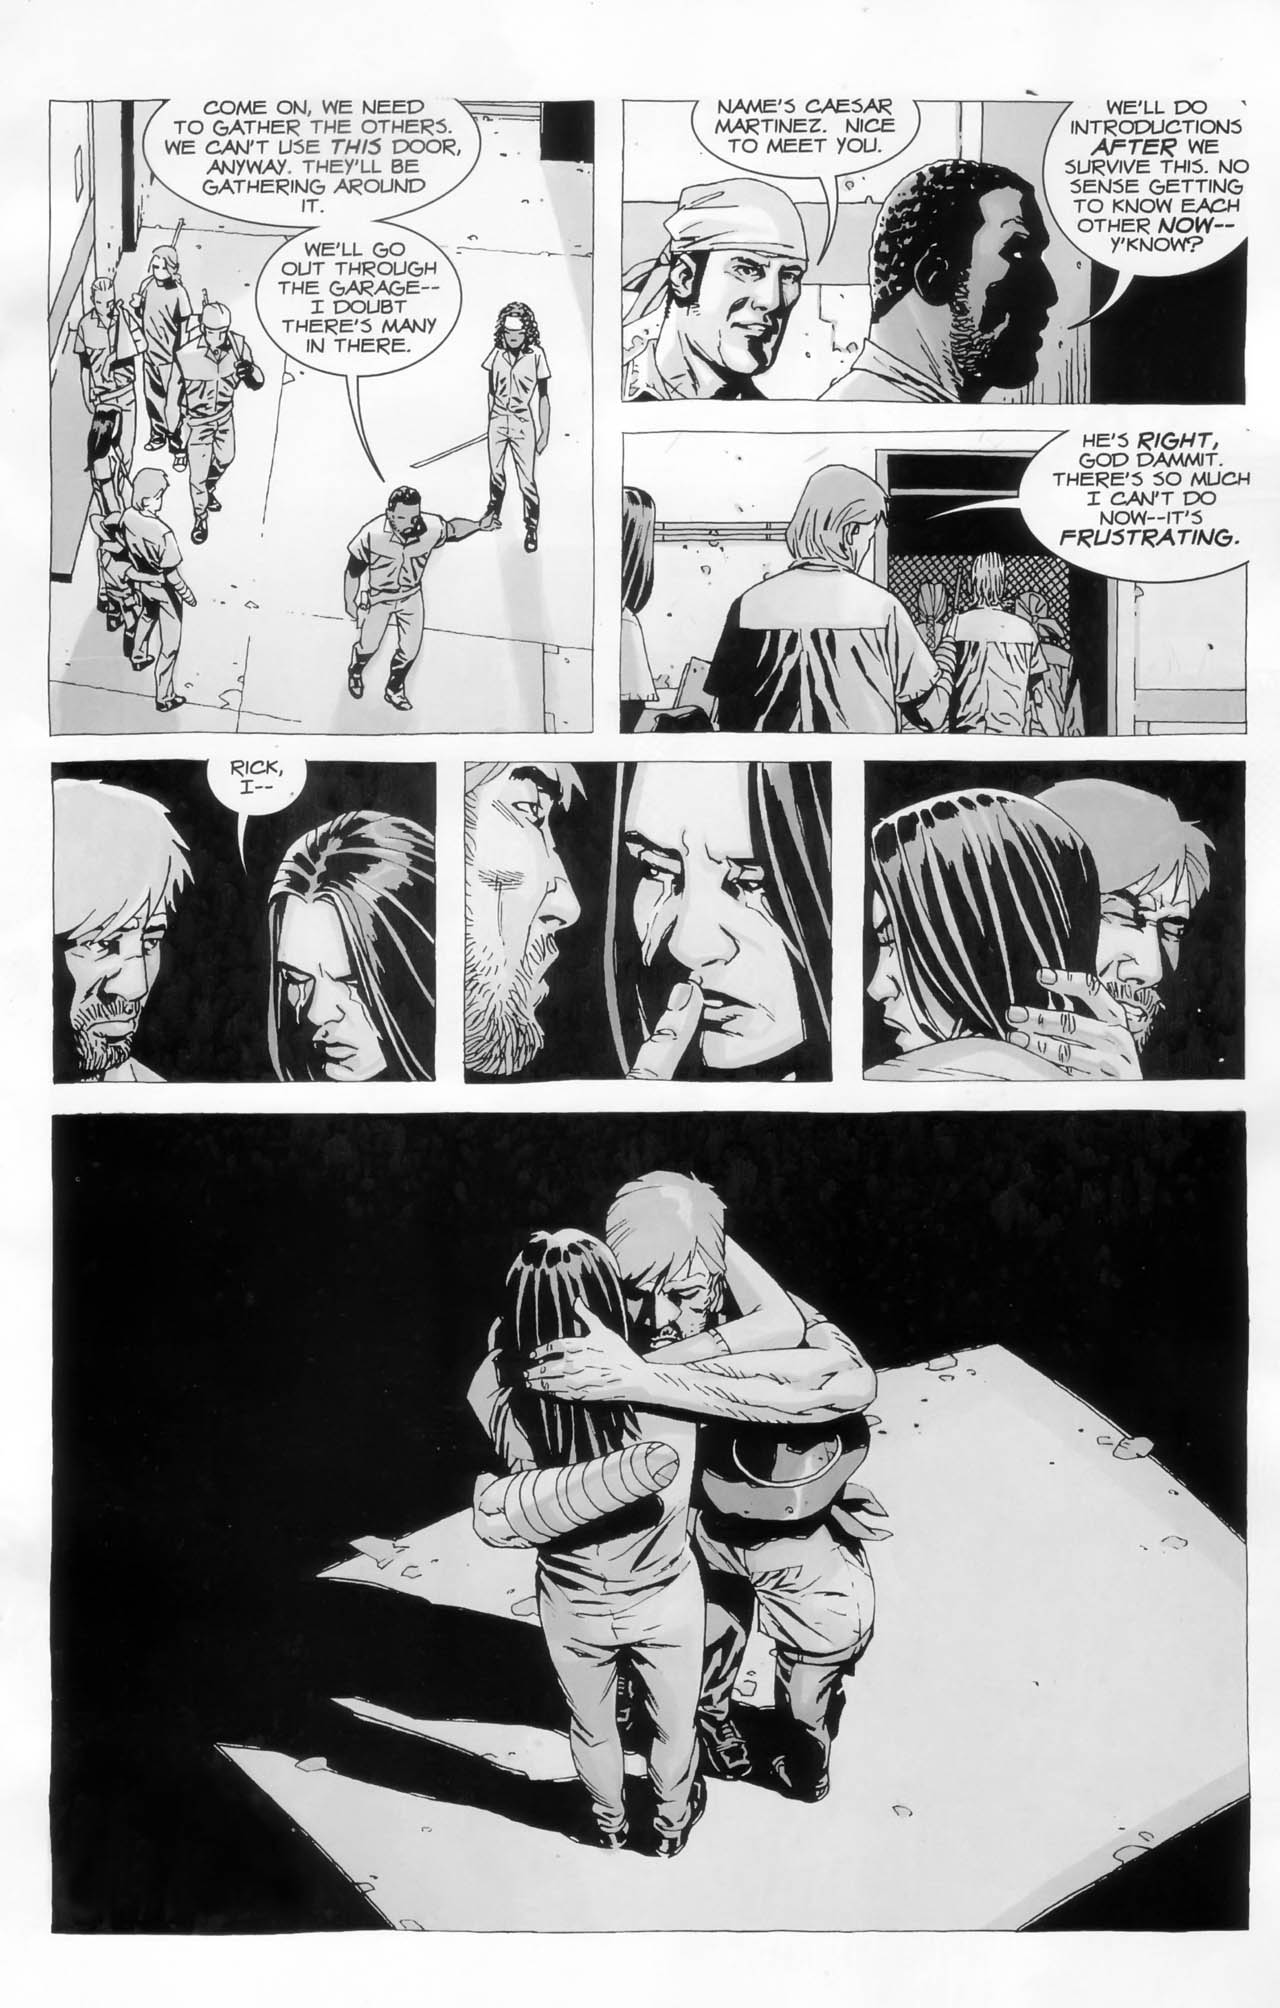 walking dead comic last page - Come On, We Need To Gather The Others. We Can'T Use This Door, Anyway. They'Ll Be Gathering Around It. Name'S Caesar Martinez. Nice To Meet You. We'Ll Do Introductions After We Survive This. No Sense Getting To Know Each Oth